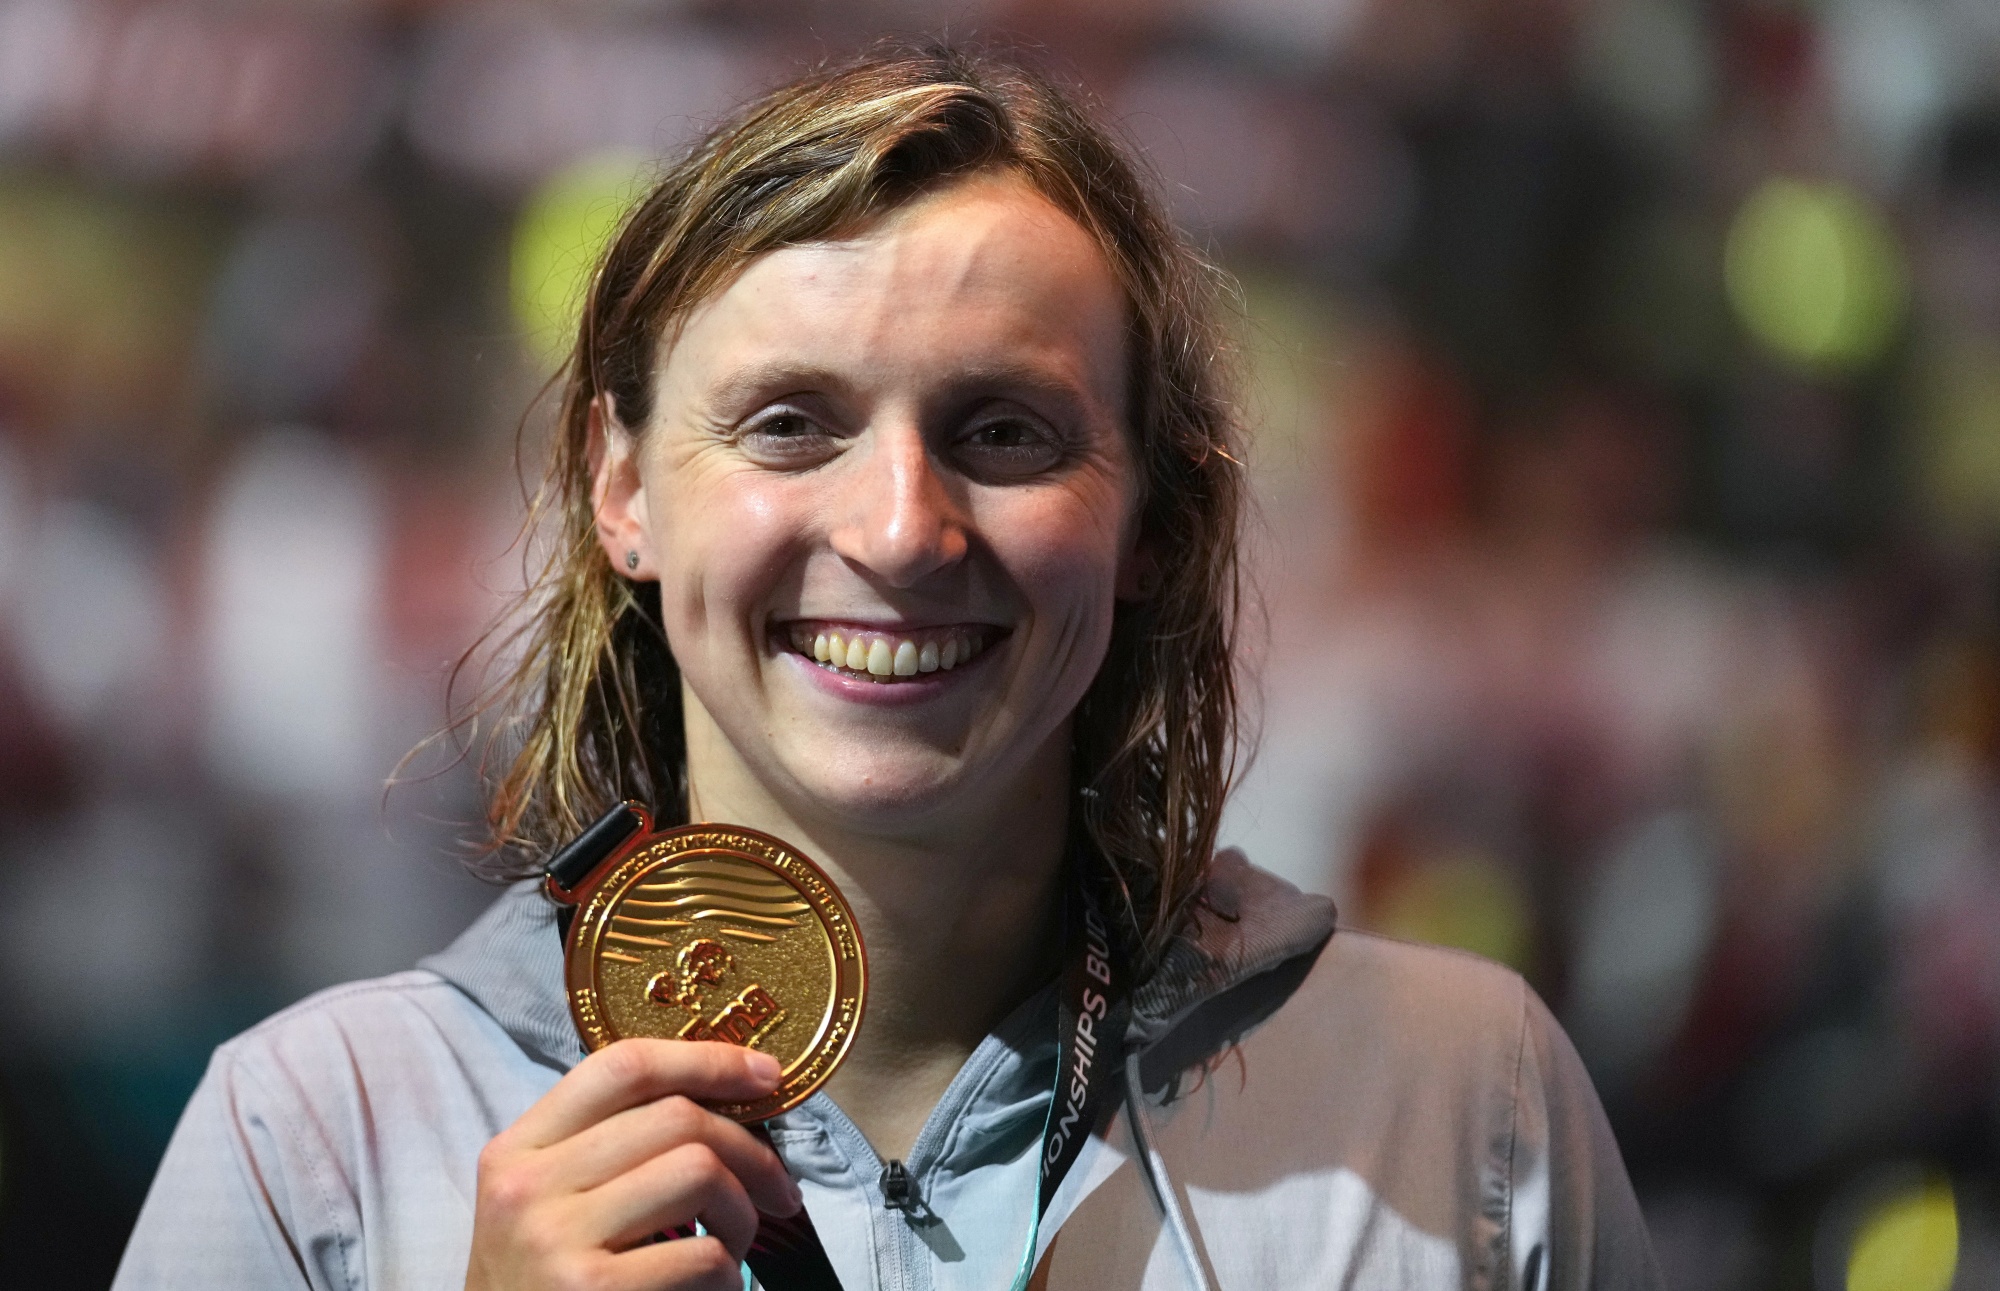 Beyond Sport on X: The most decorated woman swimmer of all time,  @katieledecky, has become the newest member of @Athleta's #PowerofShe  collective. 🏊🏾 Ledecky will also feature in their new brand campaign